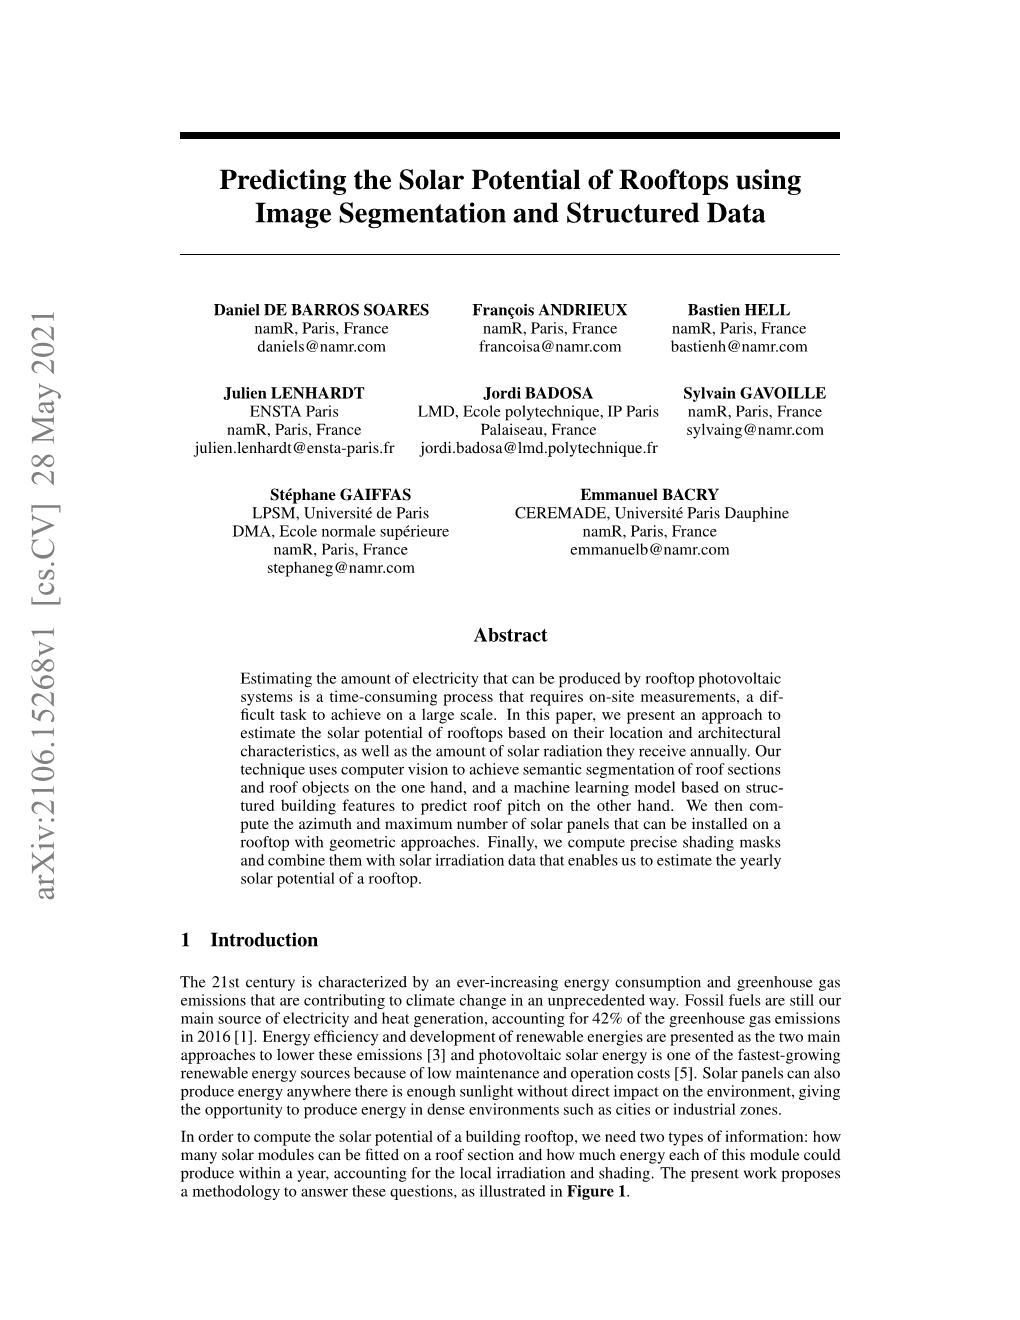 Predicting the Solar Potential of Rooftops Using Image